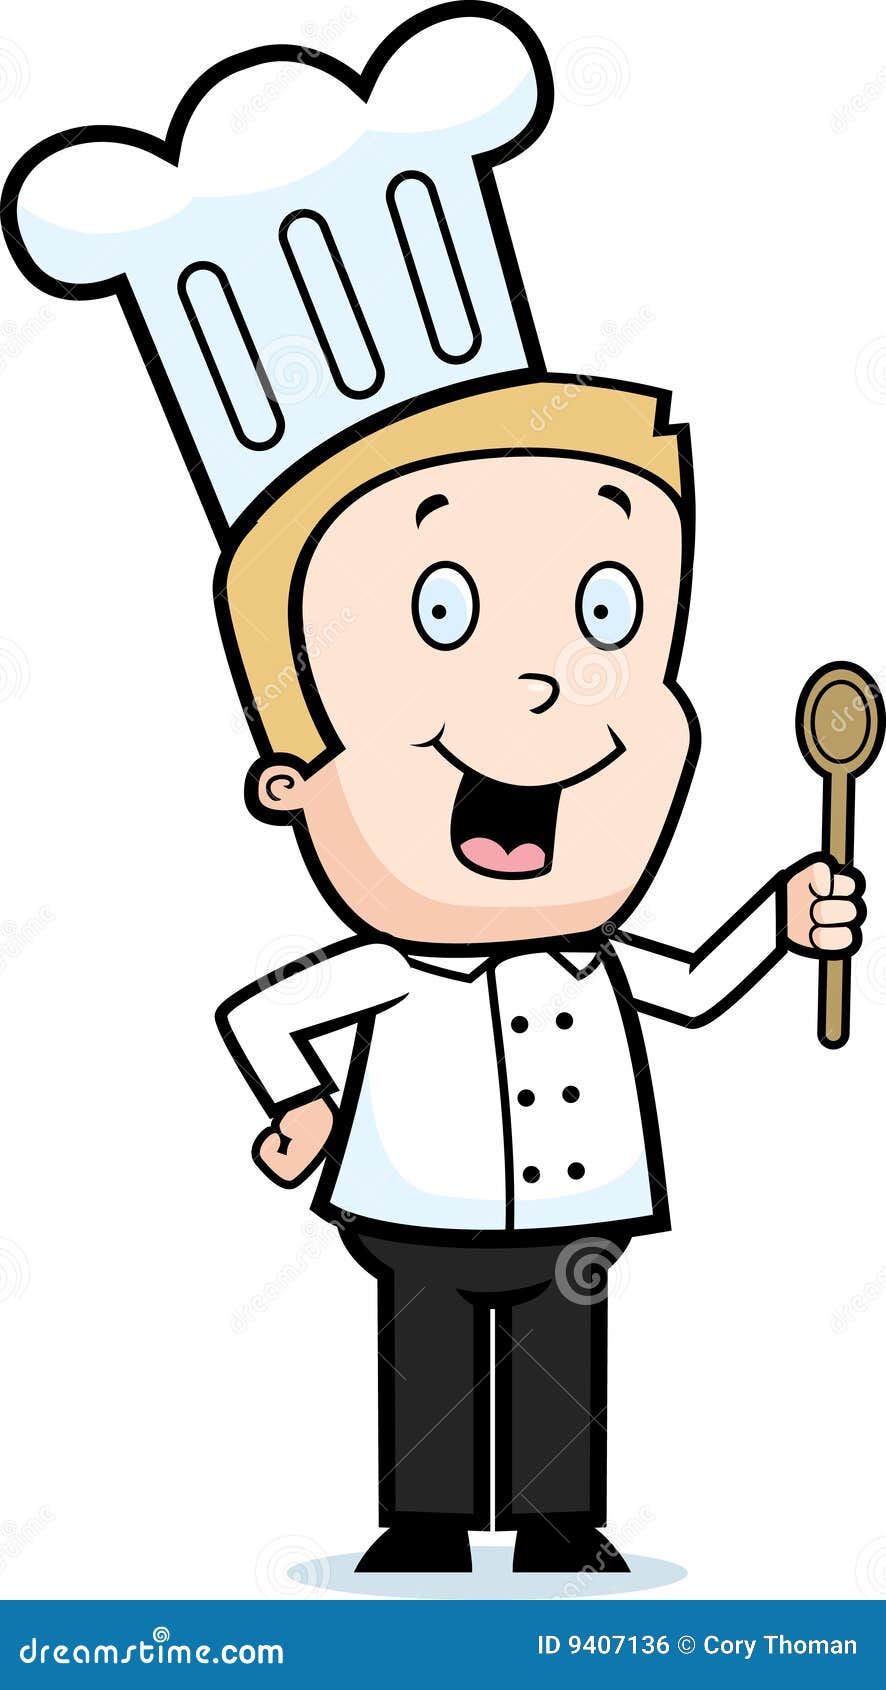 clipart boy cooking - photo #21